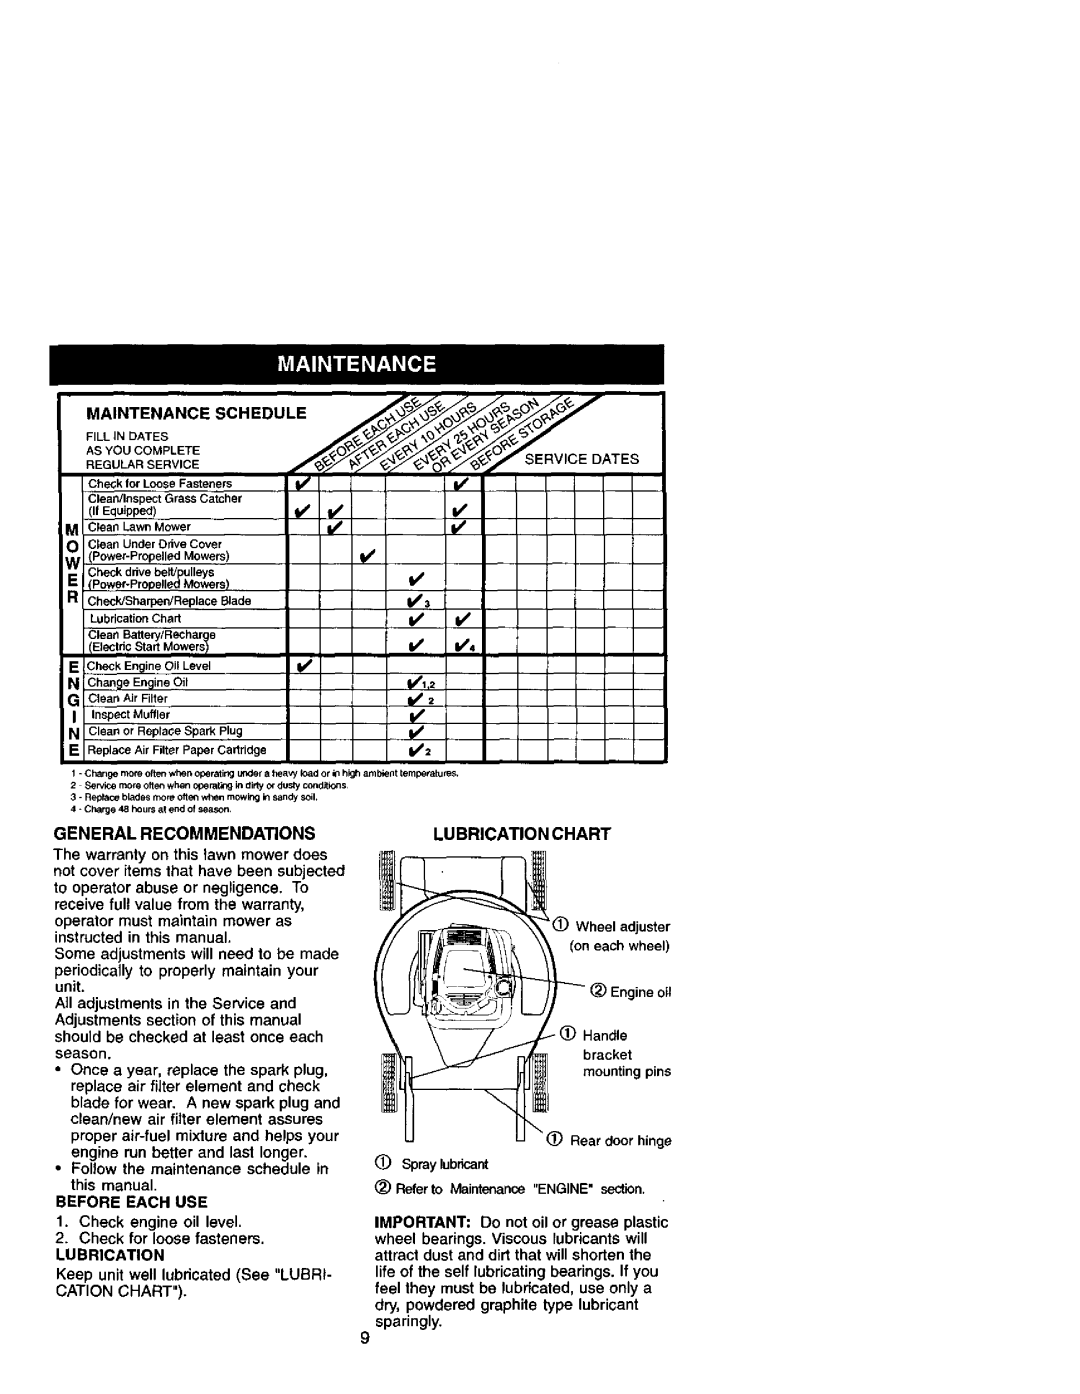 Craftsman 944.36153 owner manual AsoucOMPLETE, Lubrication Chart 